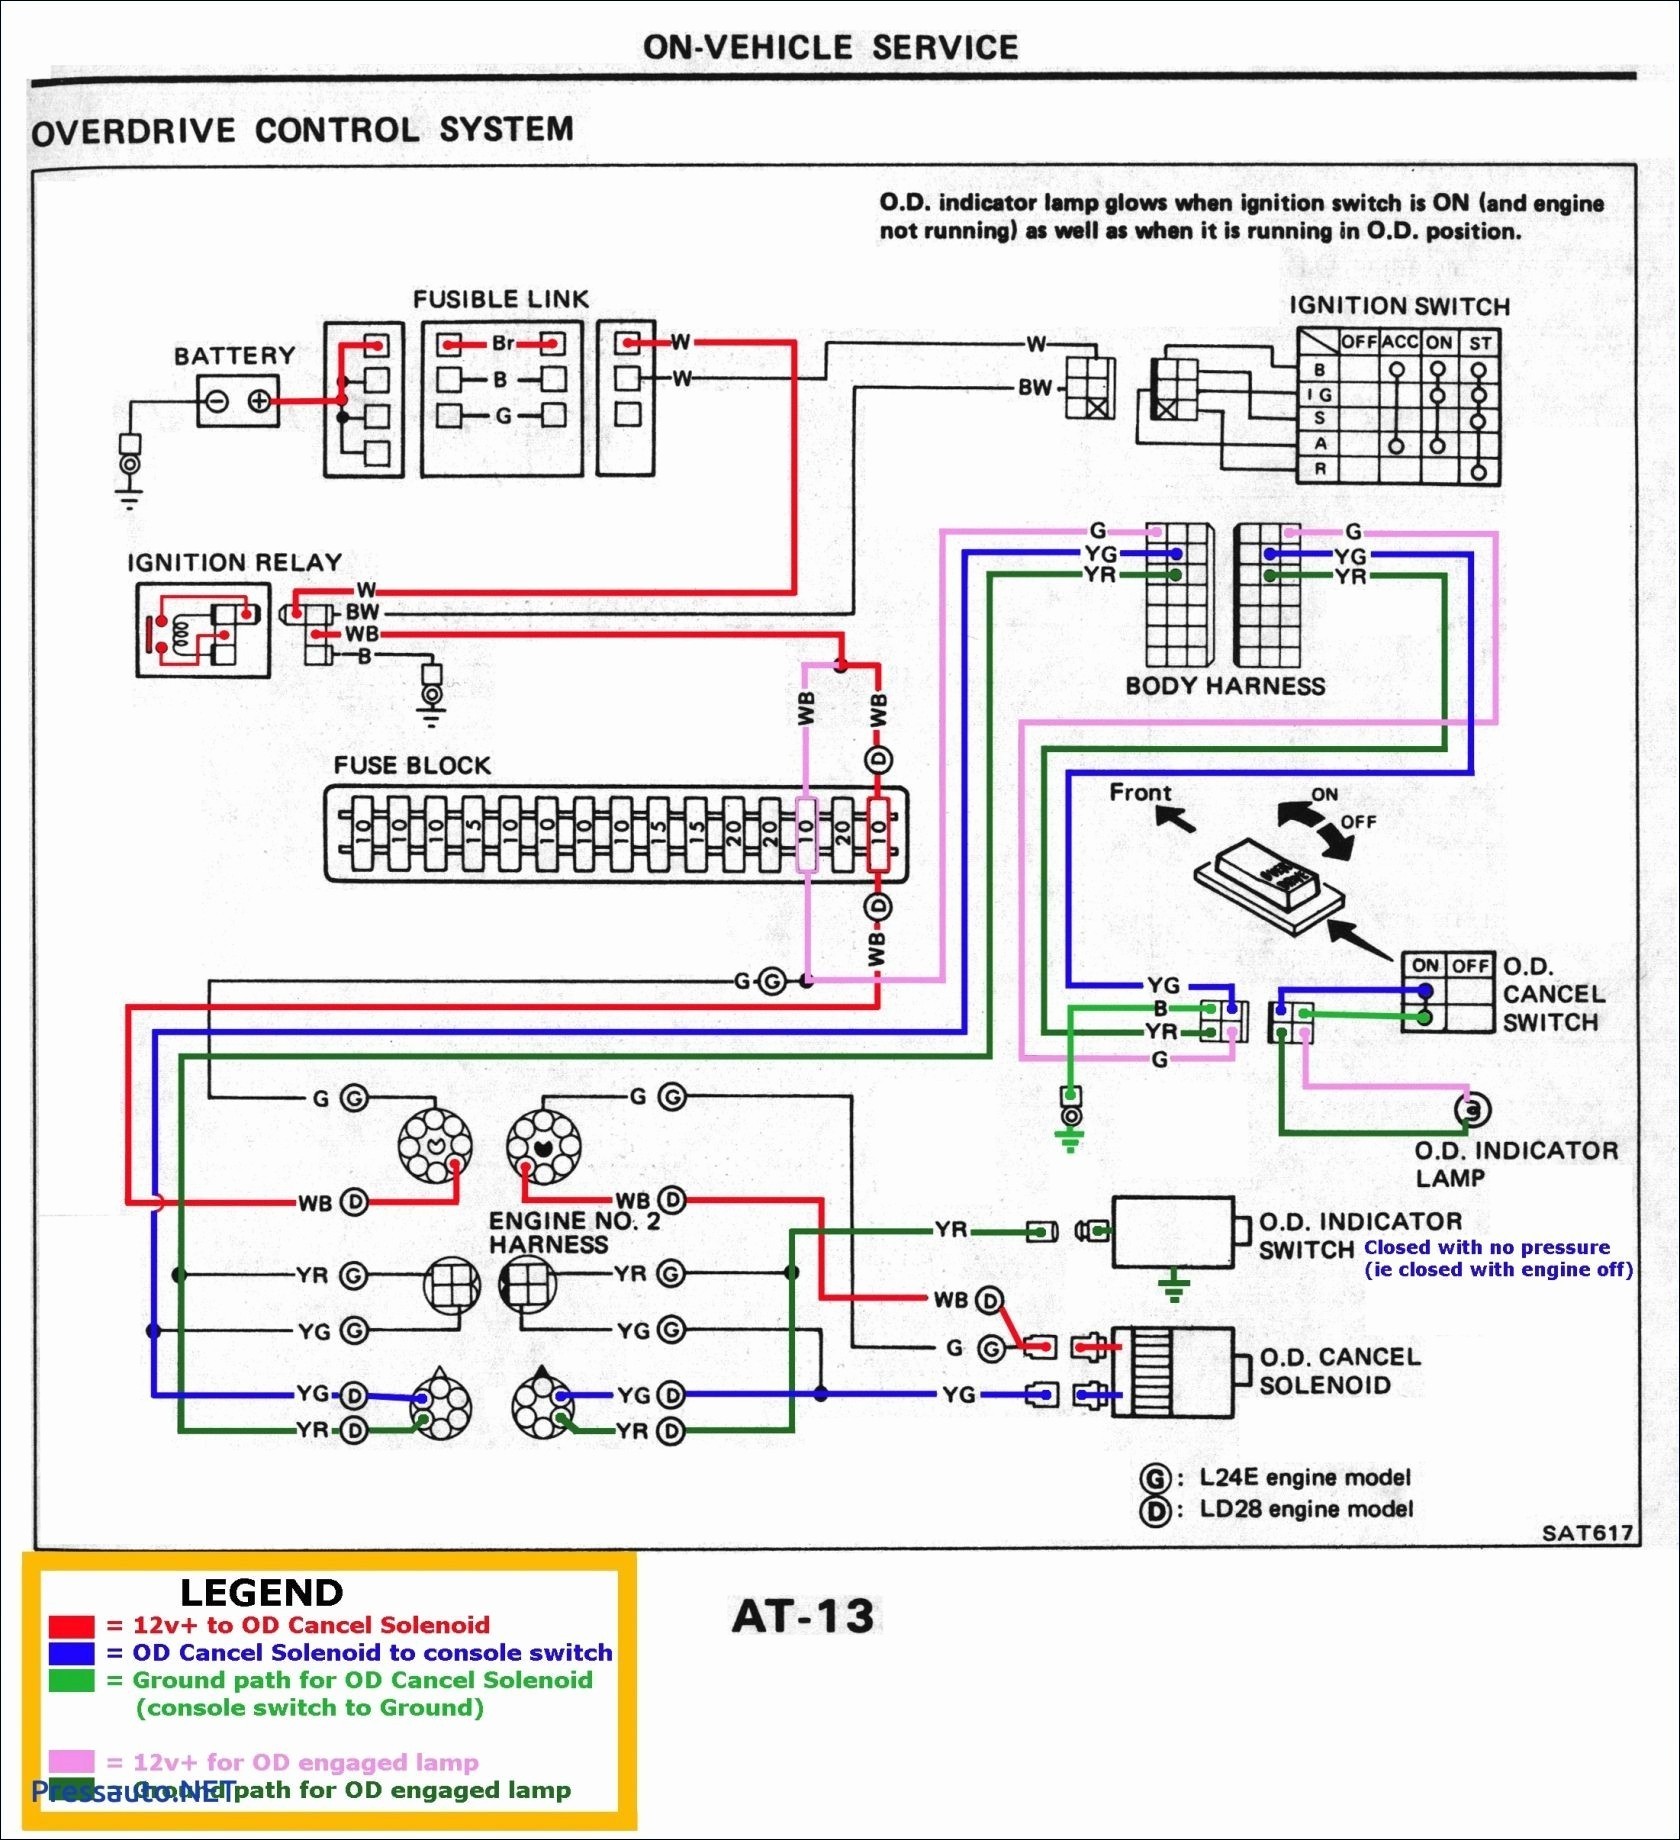 Ethernet Cable Wiring Diagram Home Cat 5 Wiring Diagram Wiring Diagram 500